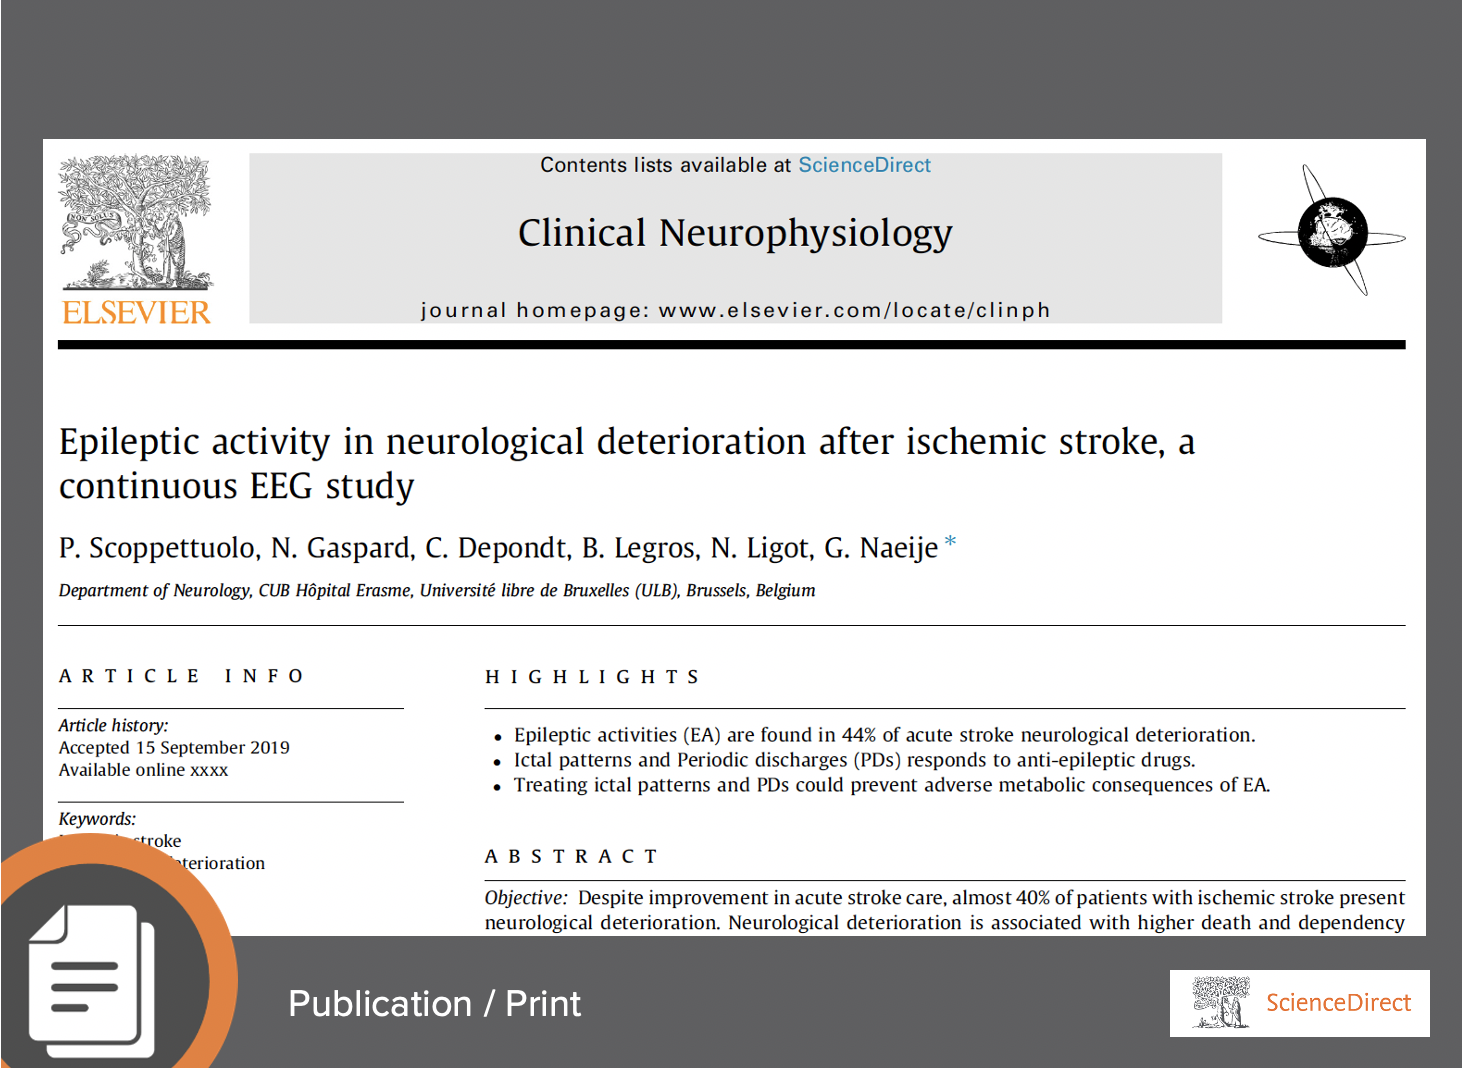 Epileptic activity in neurological deterioration after ischemic stroke, a continuous EEG study